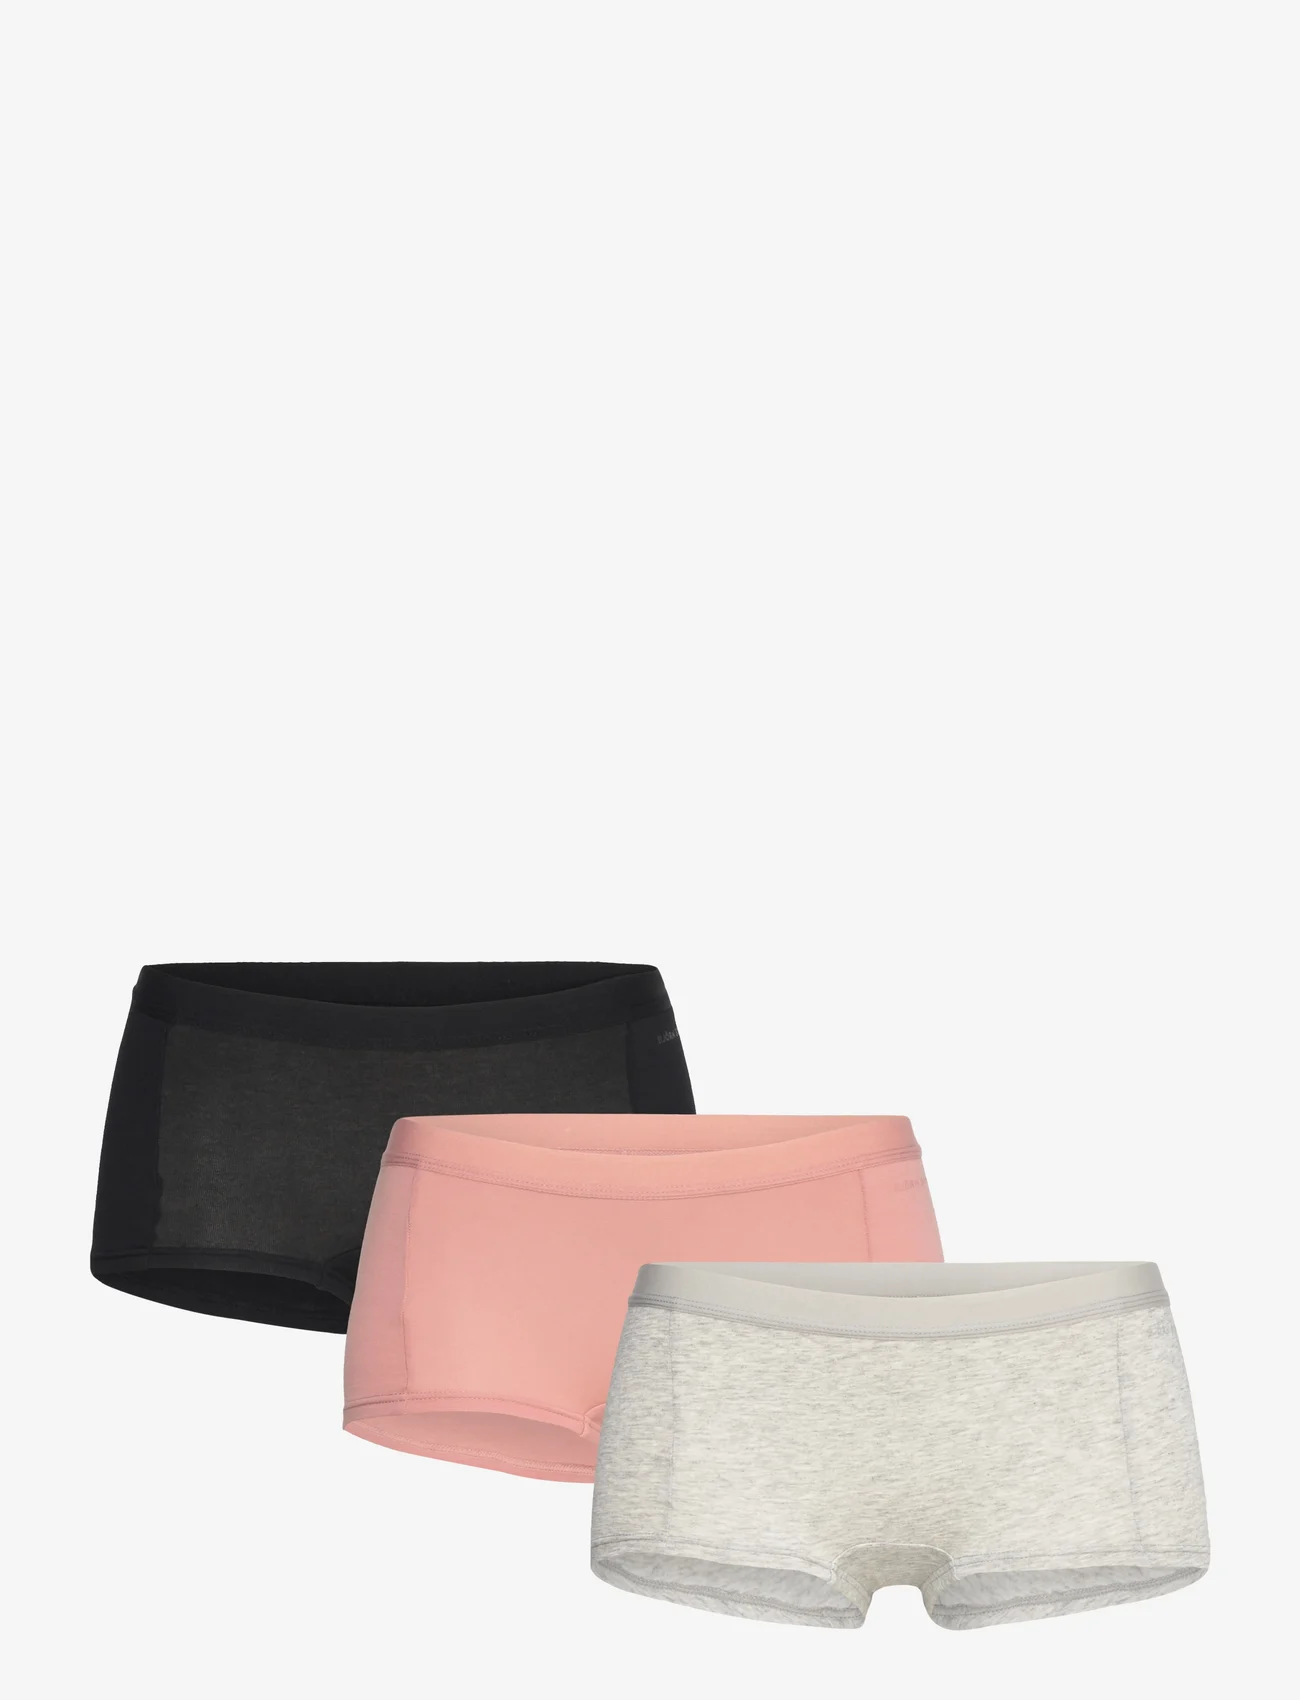 Björn Borg - CORE MINISHORTS 3p - lowest prices - multipack 2 - 0